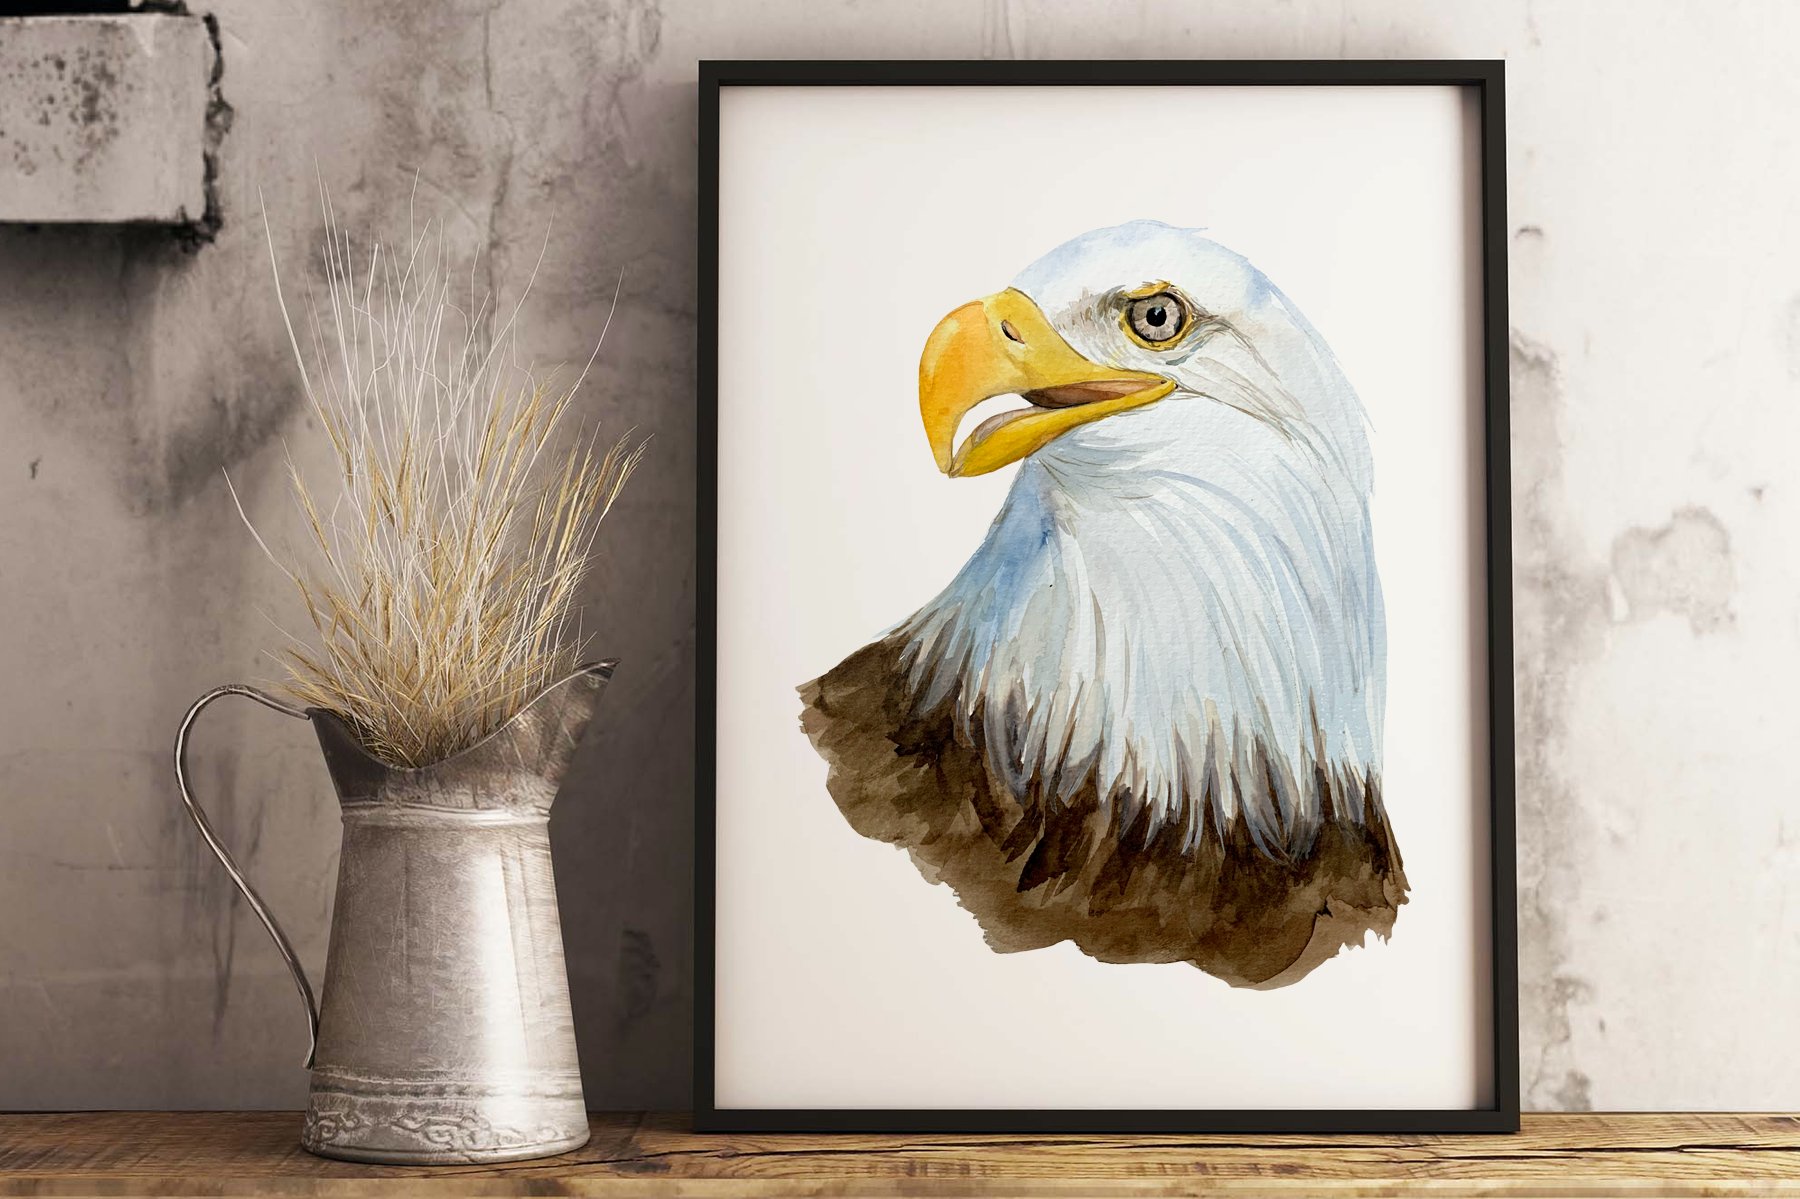 Painting on no eagle on a dark background.